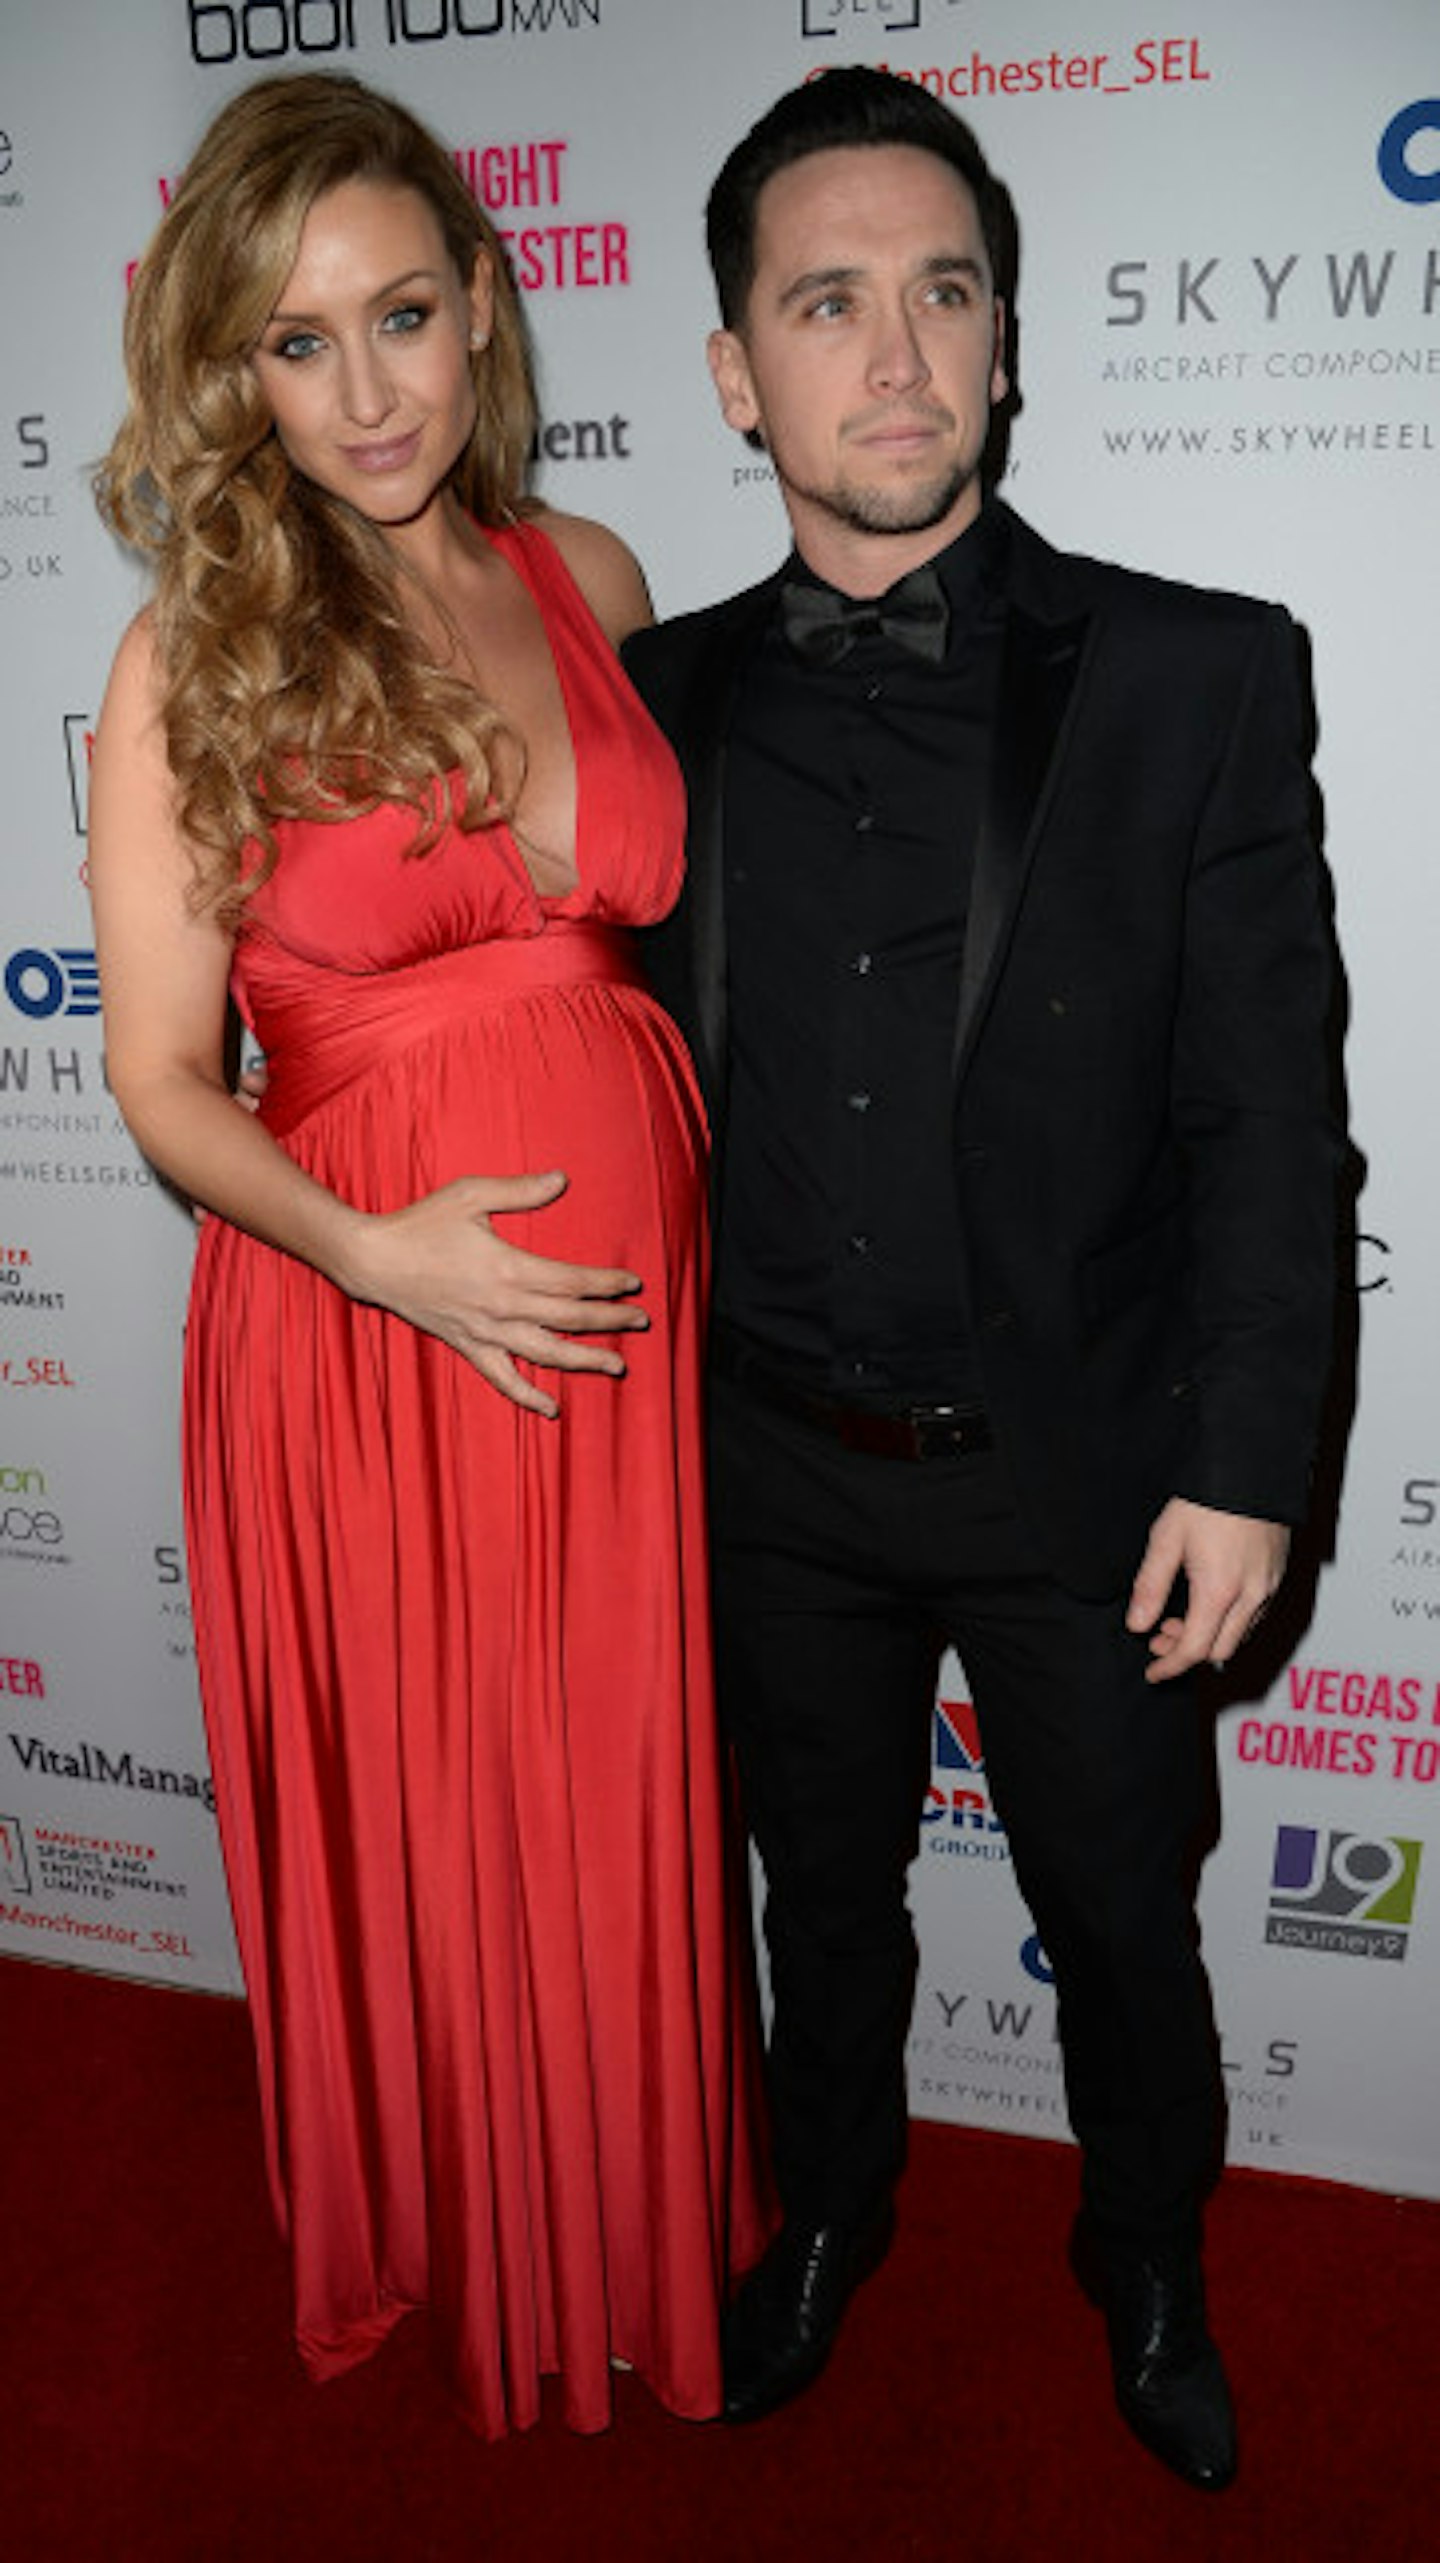 Catherine Tyldesley and Thomas Pitfield on the red carpet